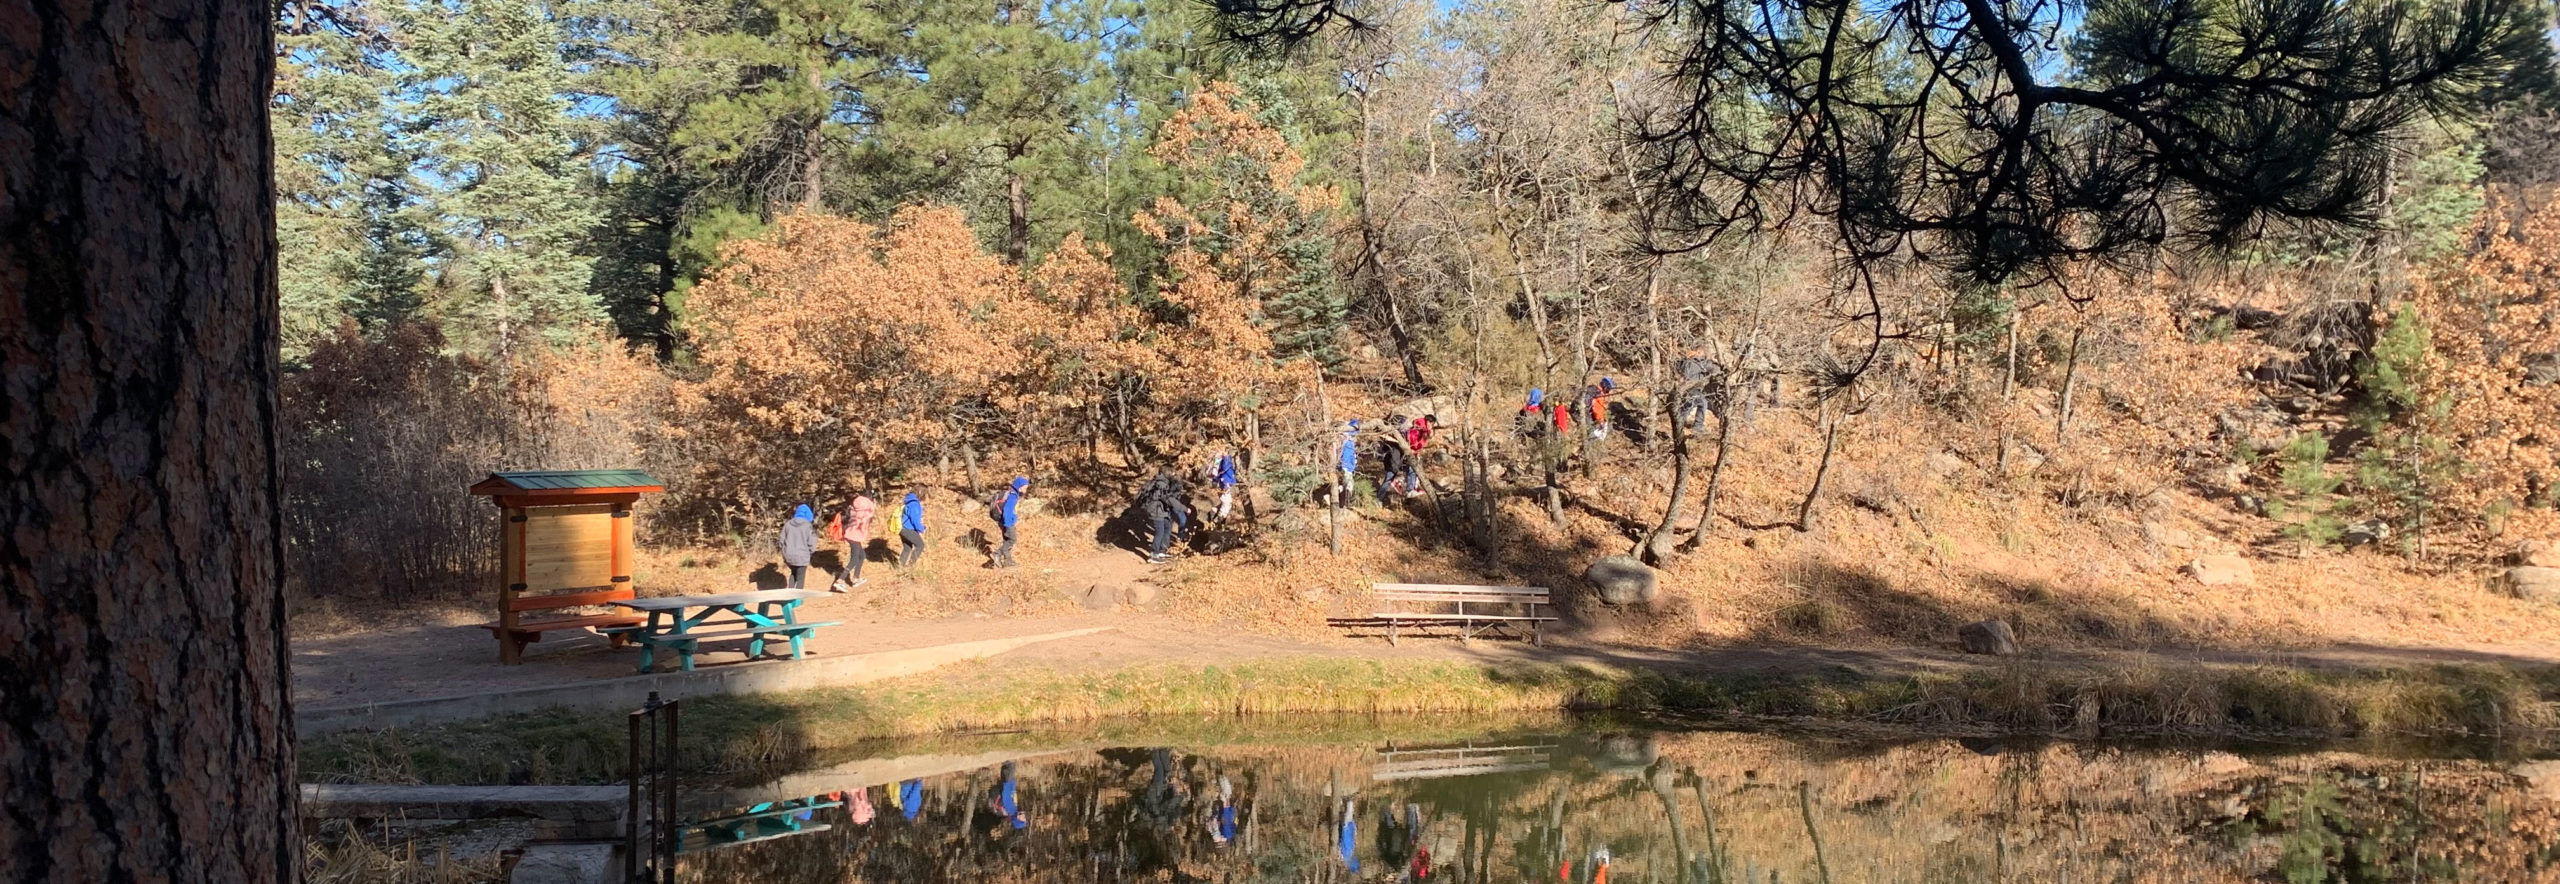 hikers by a pond